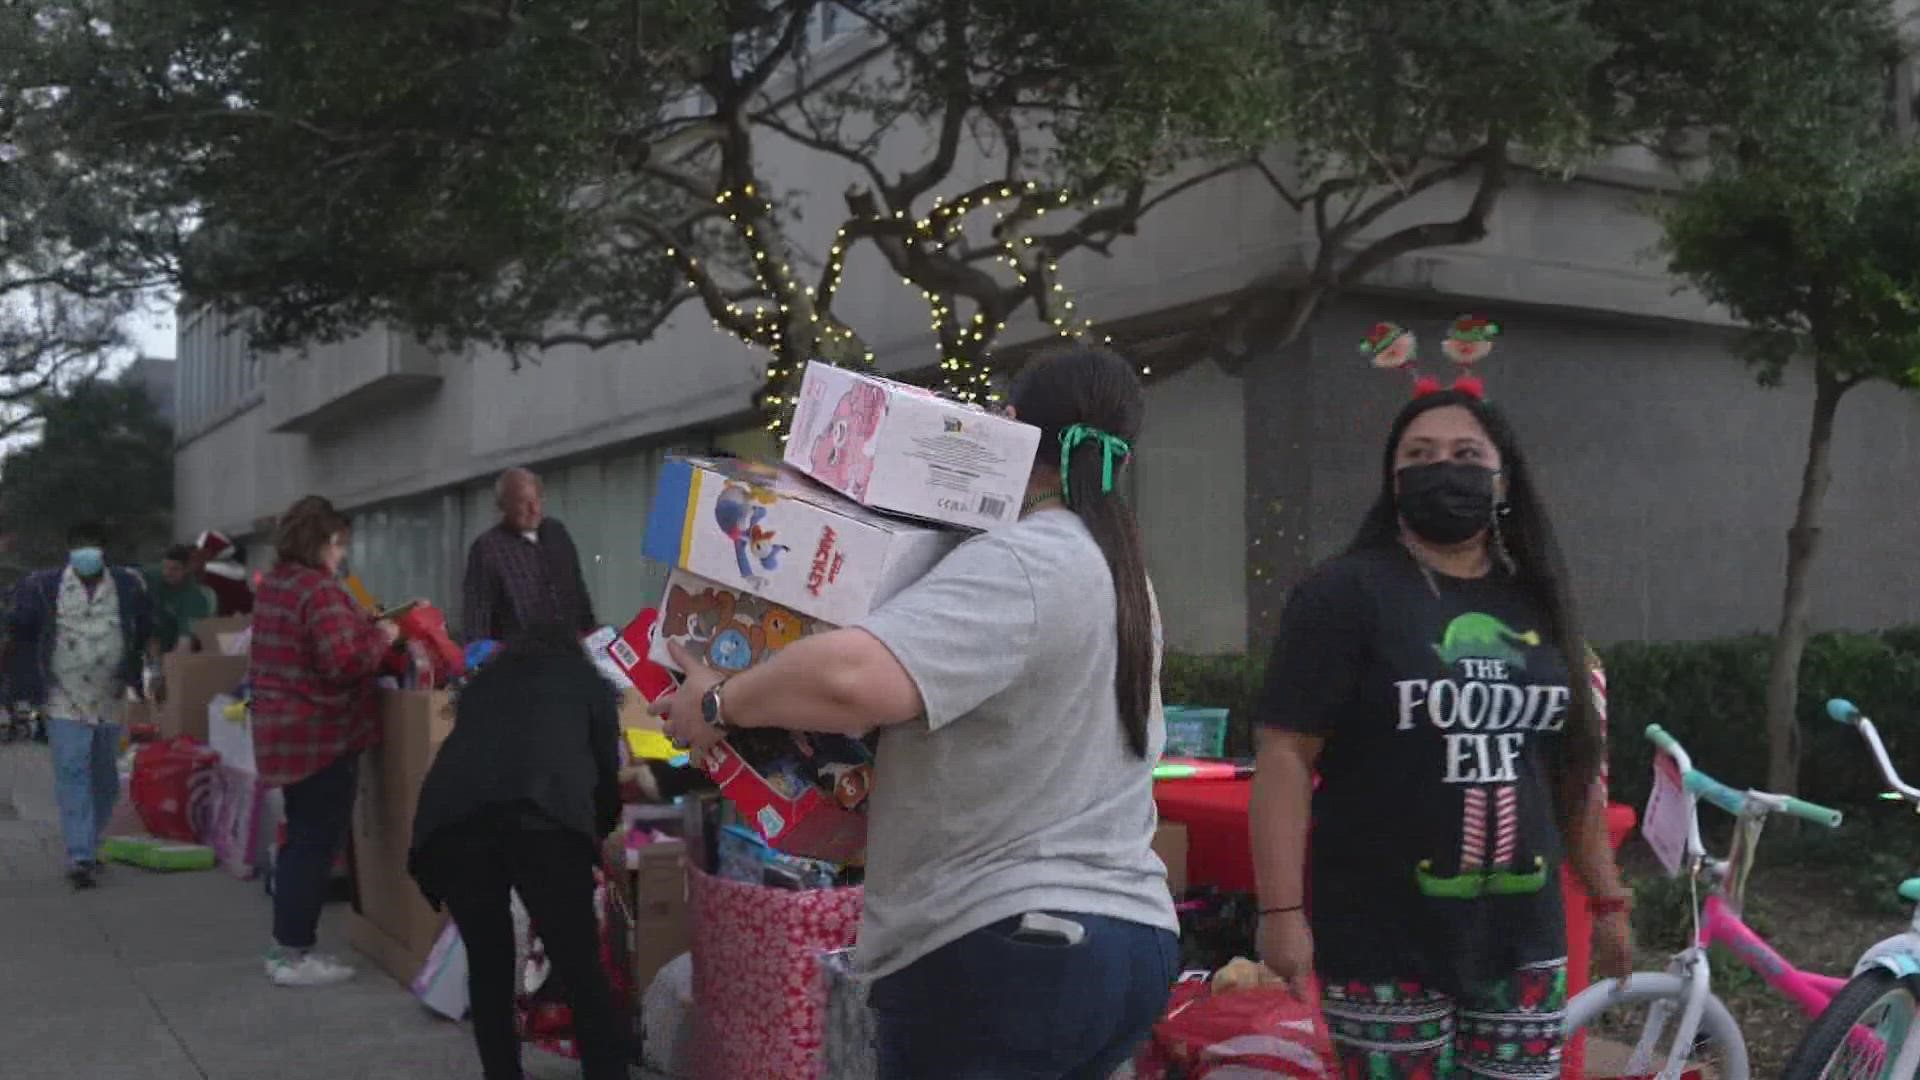 WFAA's Santa's Helpers is celebrating its 53rd year! Check our website to learn how you can help.